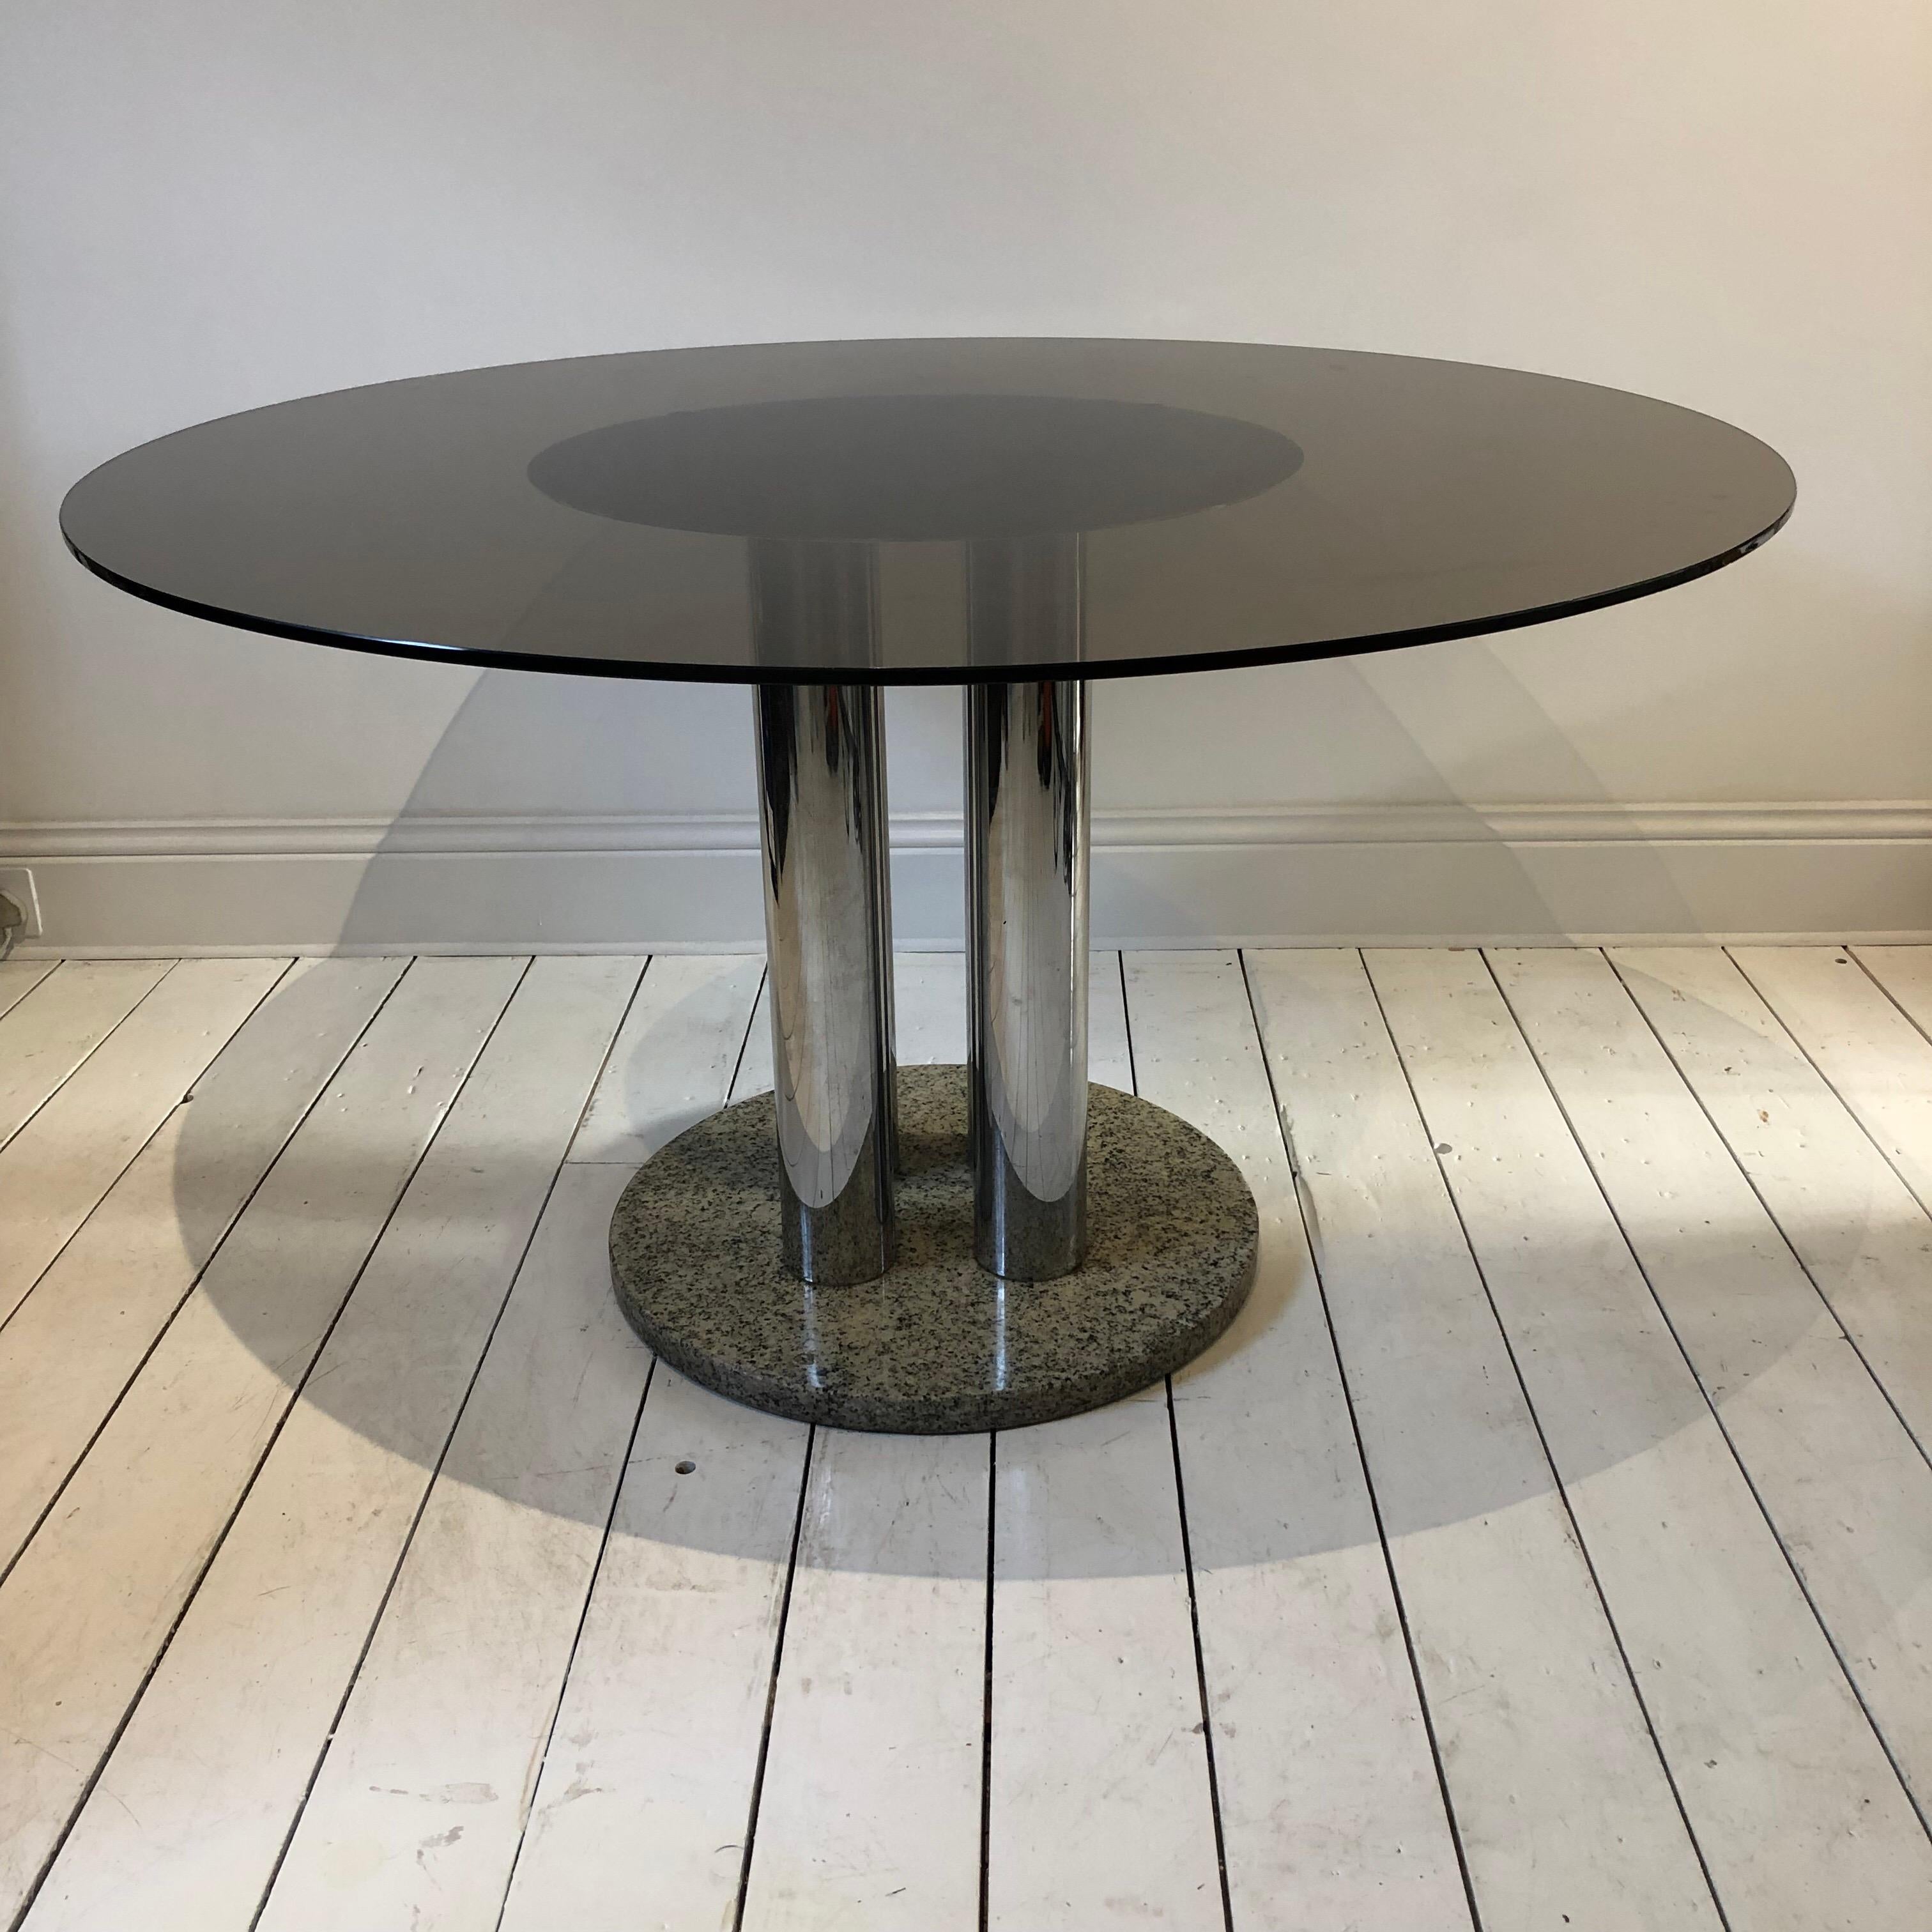 1970s Italian round dining table attributed to Marco Zanuso for Zanotta. Granite round base with four chrome pillar columns with a round chrome disk where the smoked glass top sits.
Overall very good condition with some wear or chips. The granite